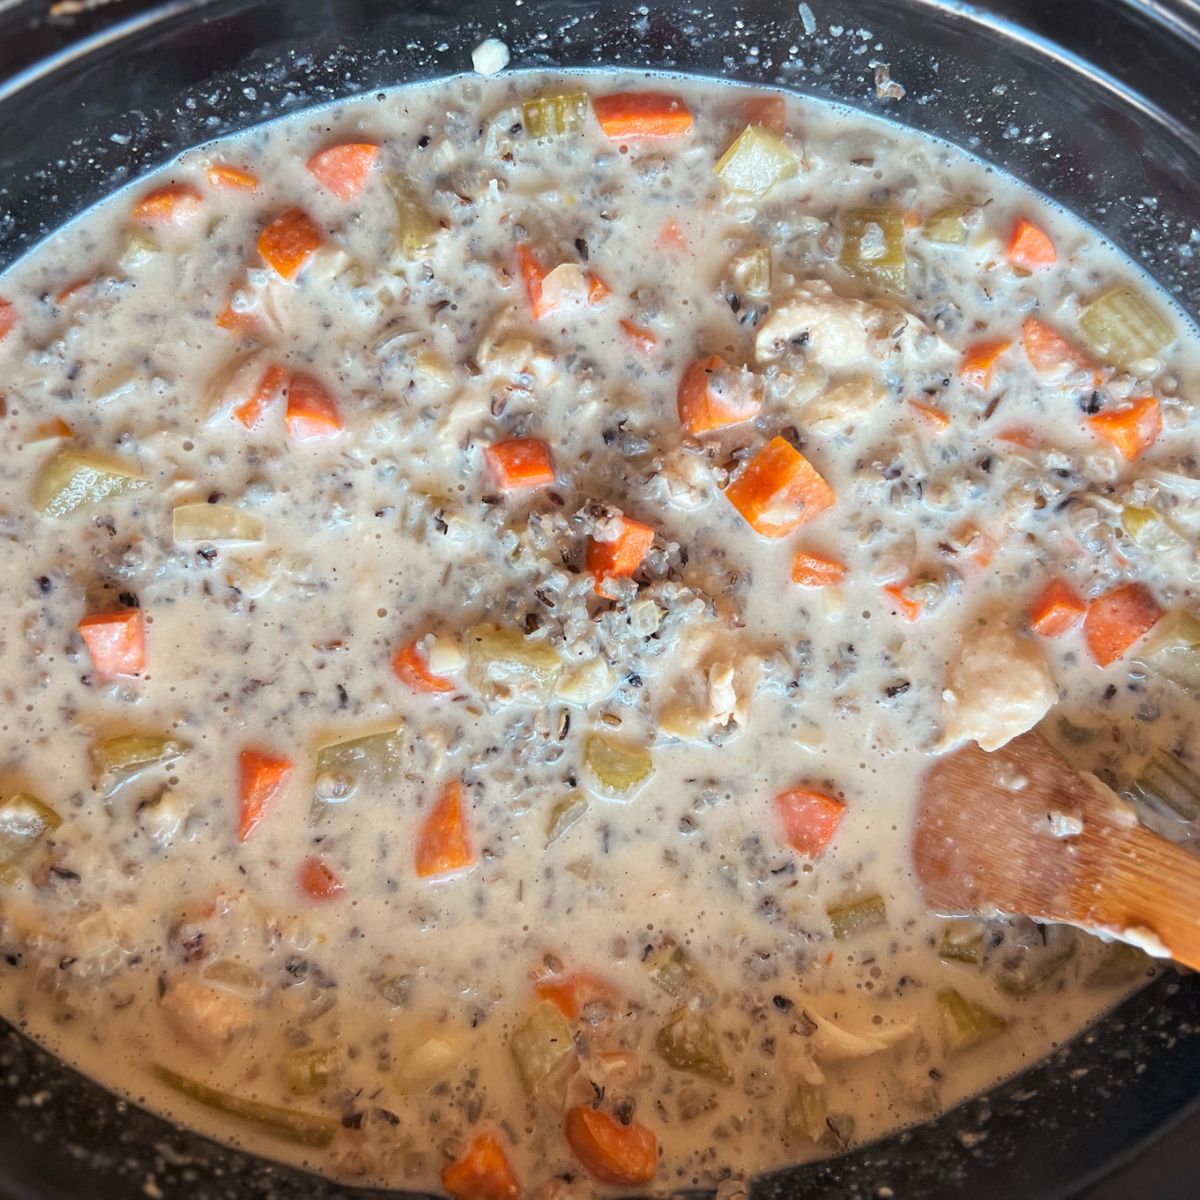 Crockpot with fully cooked chicken wild rice and all ingredients mixed together in it.